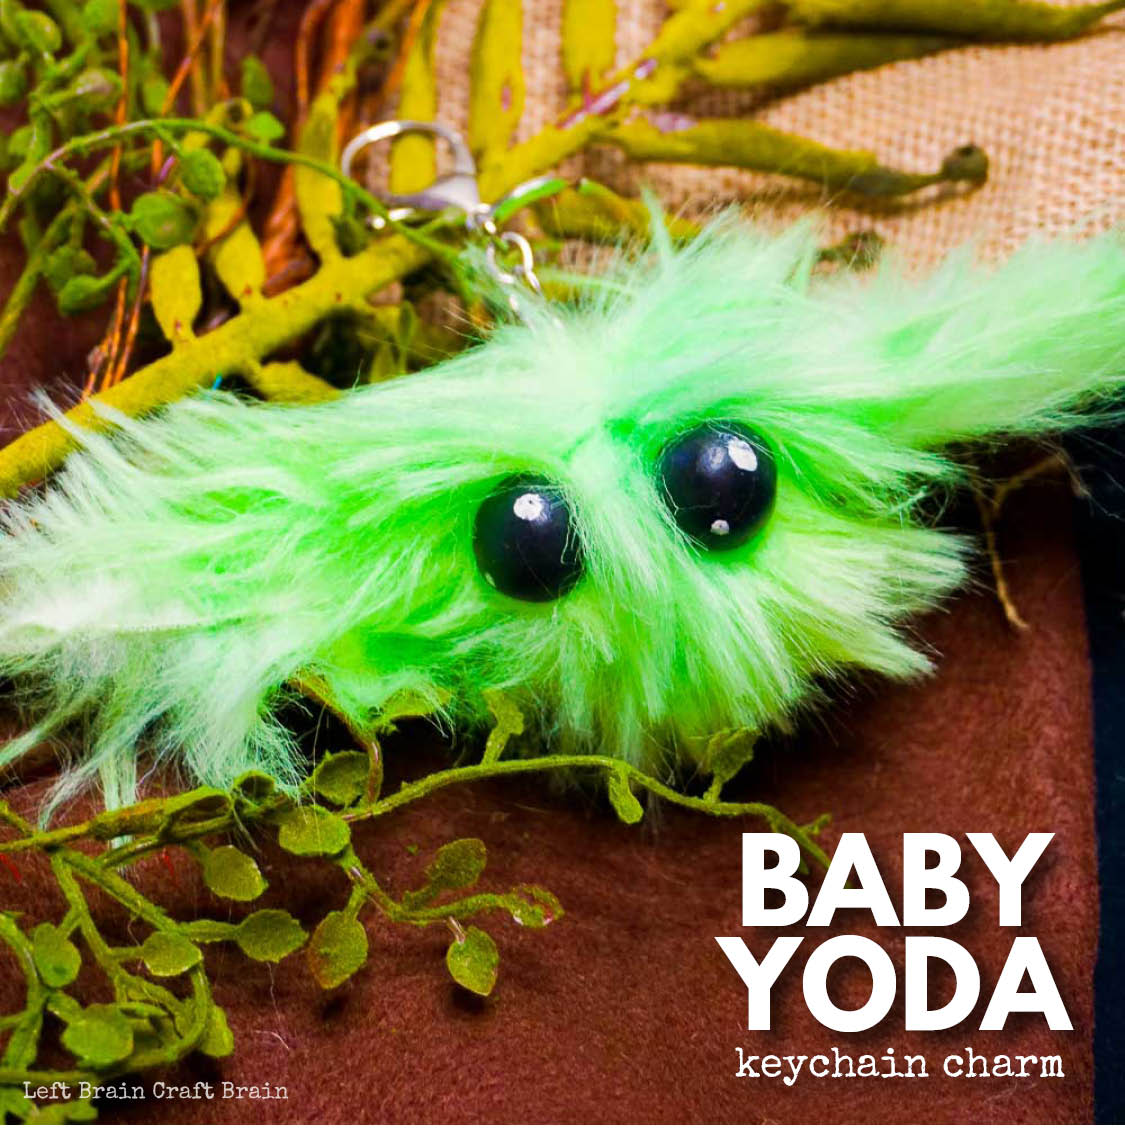 Isn't Baby Yoda from The Mandalorian the cutest thing? Since you can't buy one, make a Baby Yoda Keychain Charm.